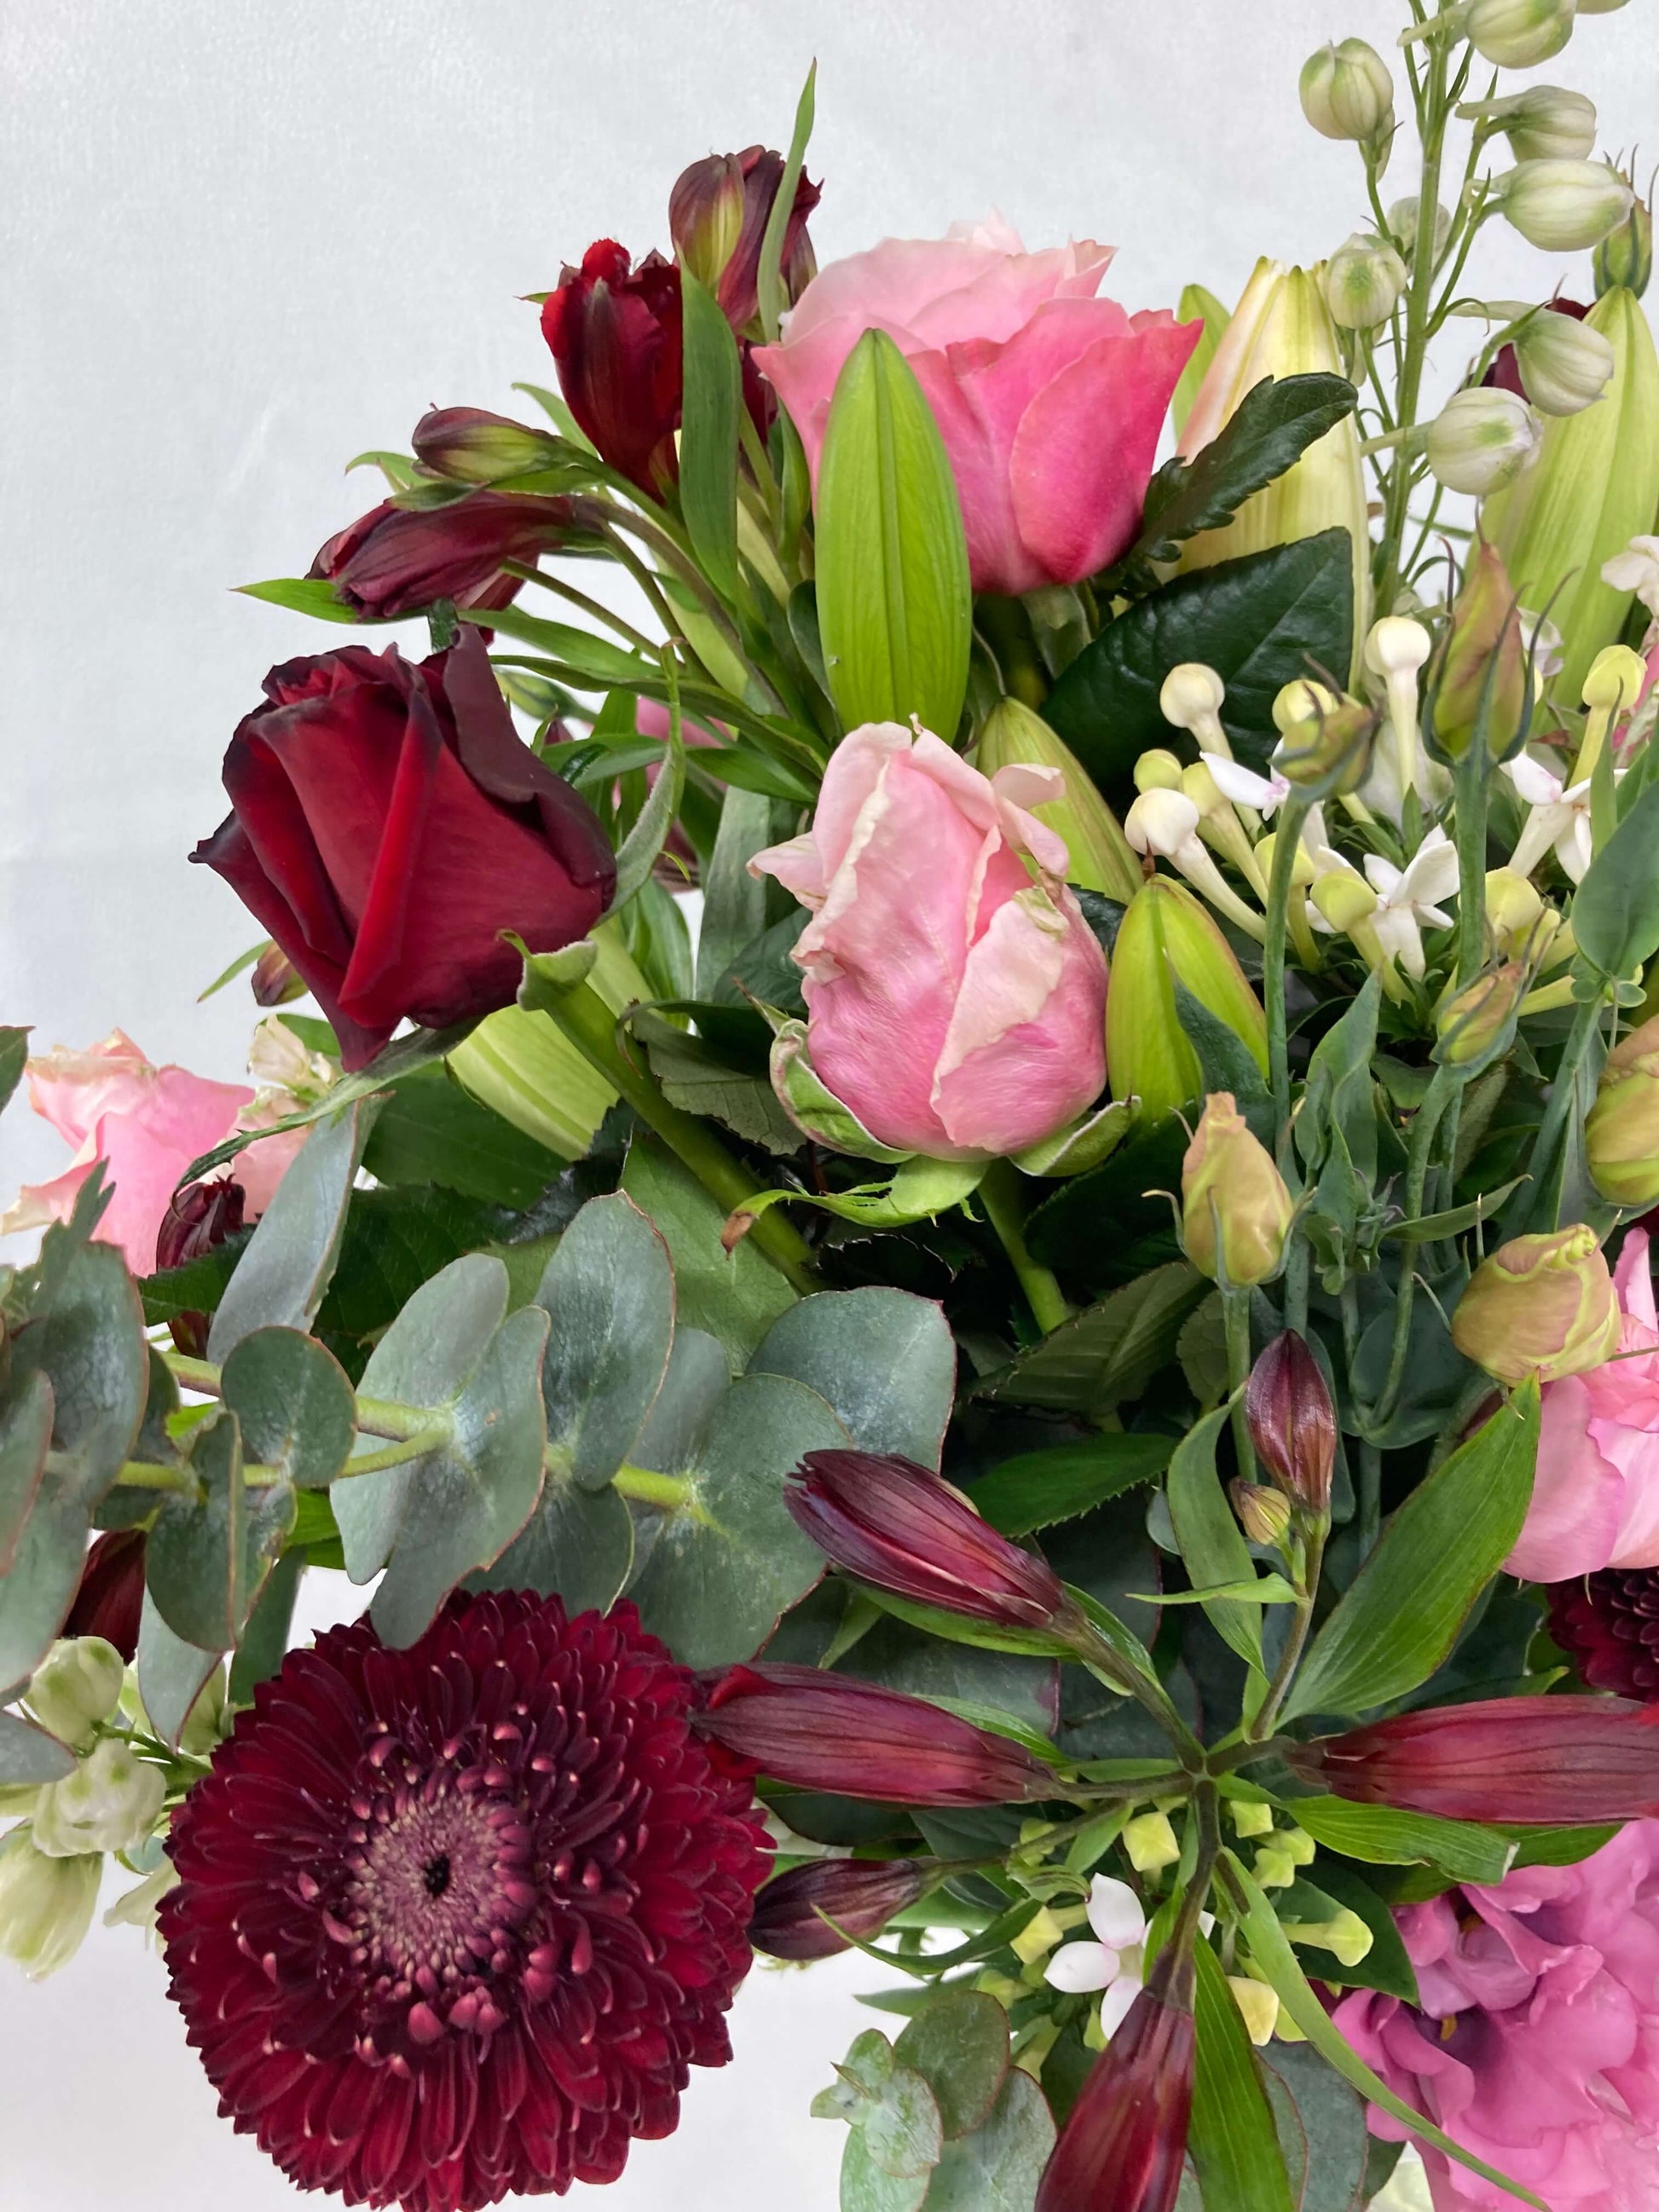 Our romantic bouquet up close. Full of pink and dark red flowers.